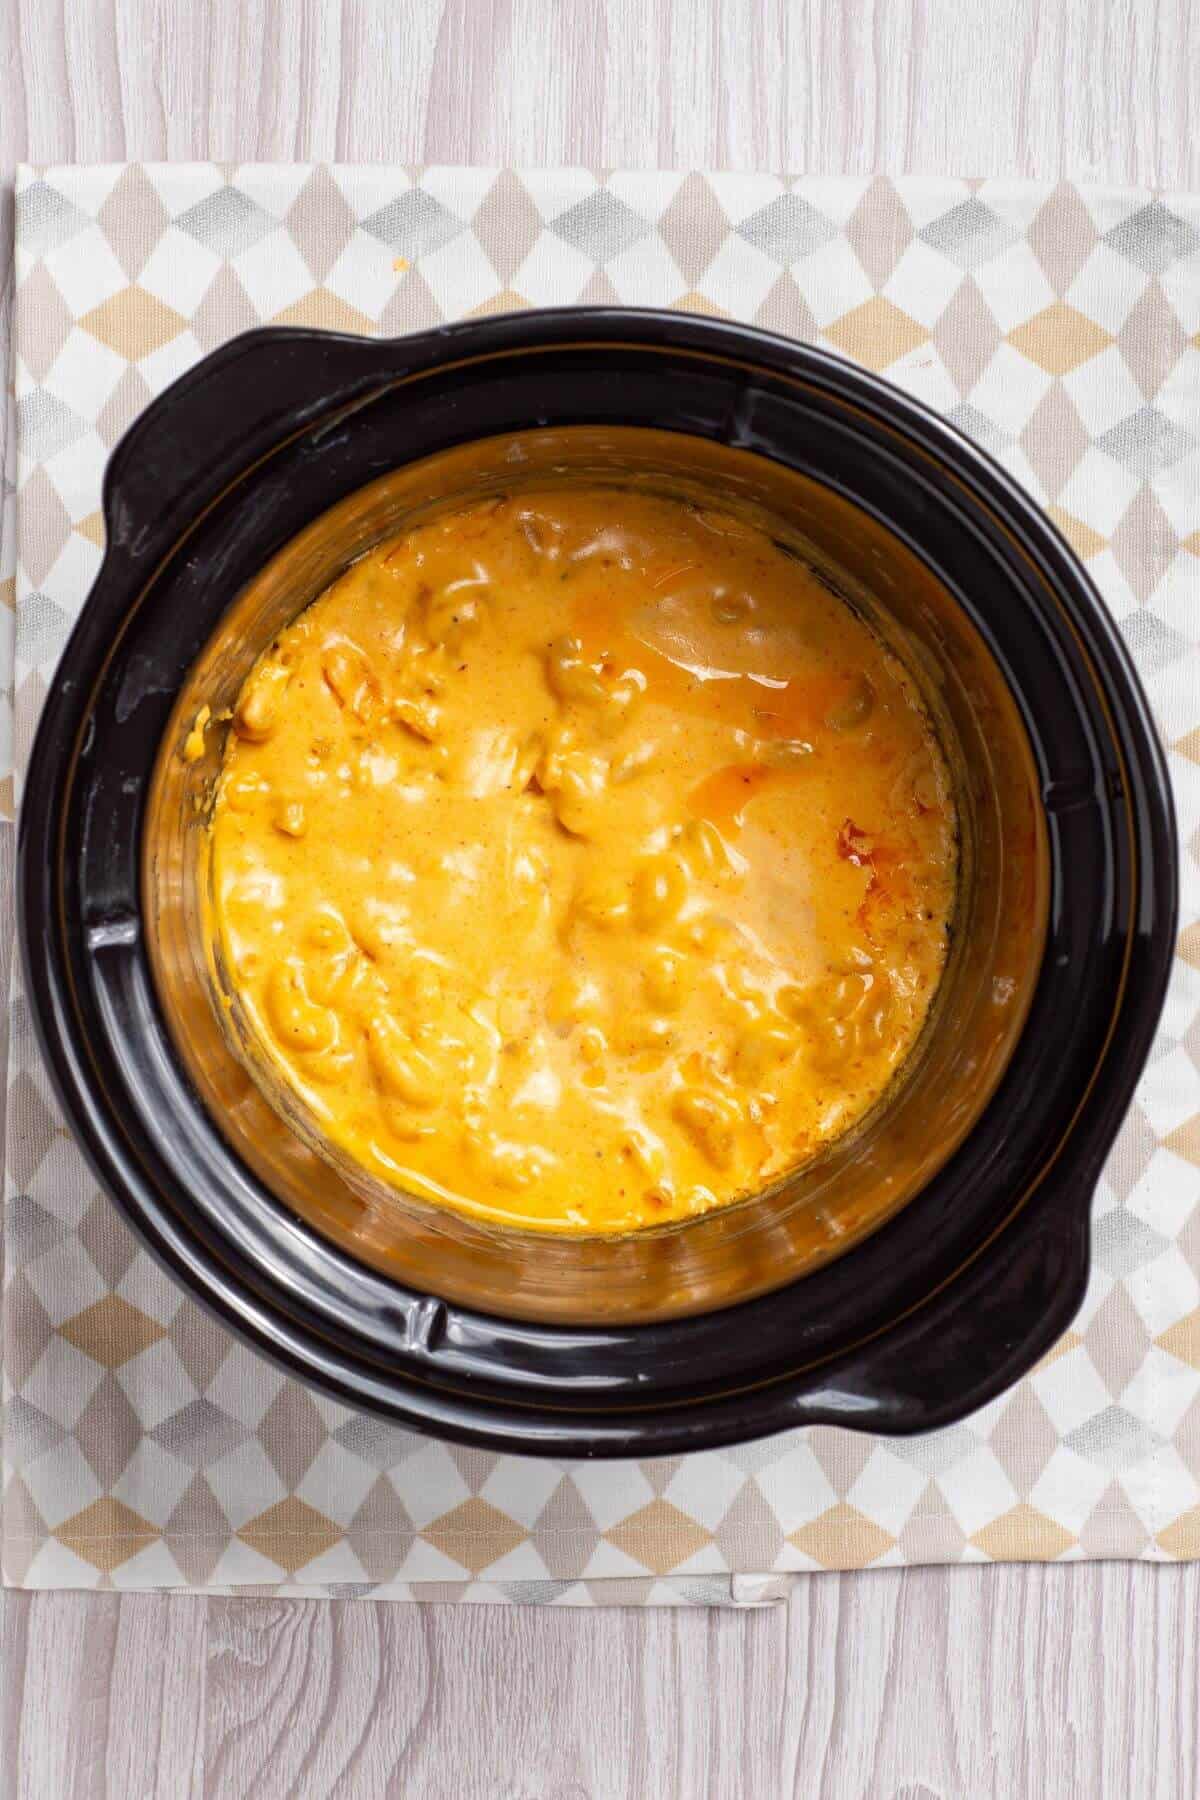 A crock pot full of macaroni and cheese.